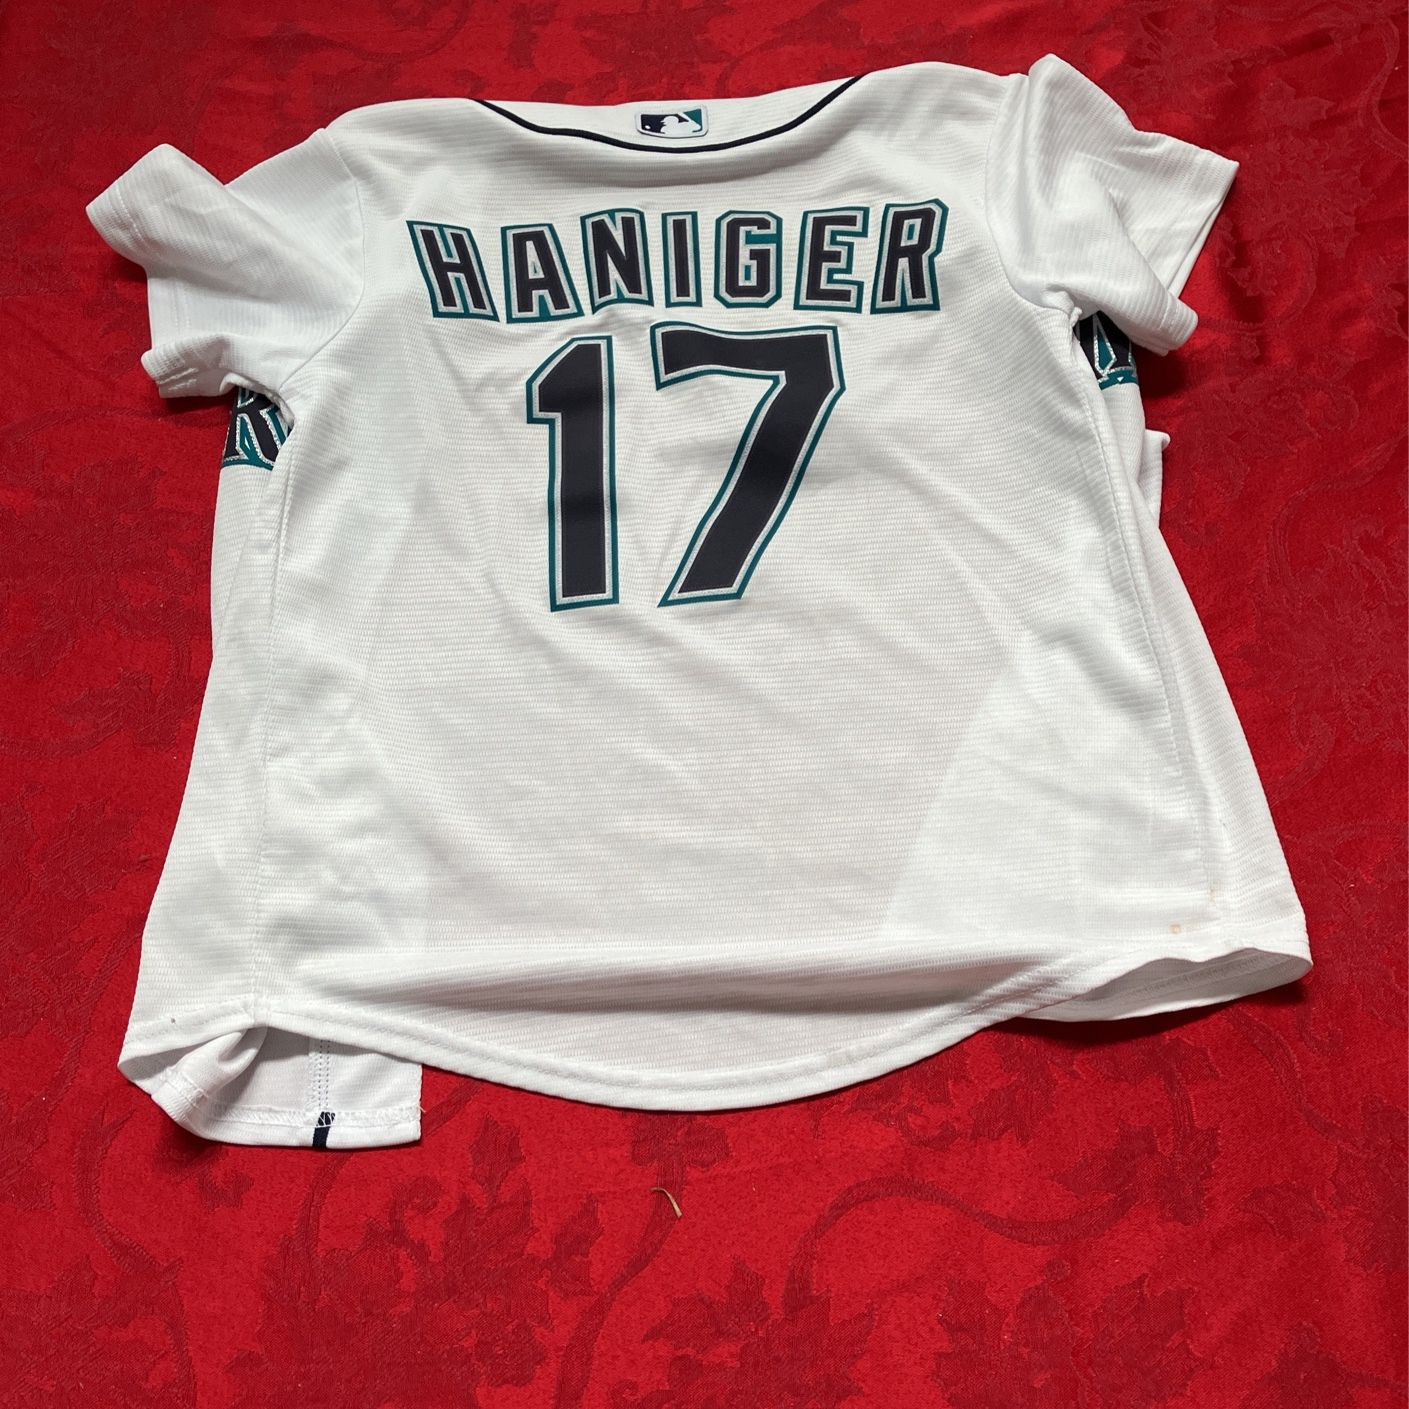 Seattle Mariners Jersey New With Tags Size Large for Sale in Kenmore, WA -  OfferUp